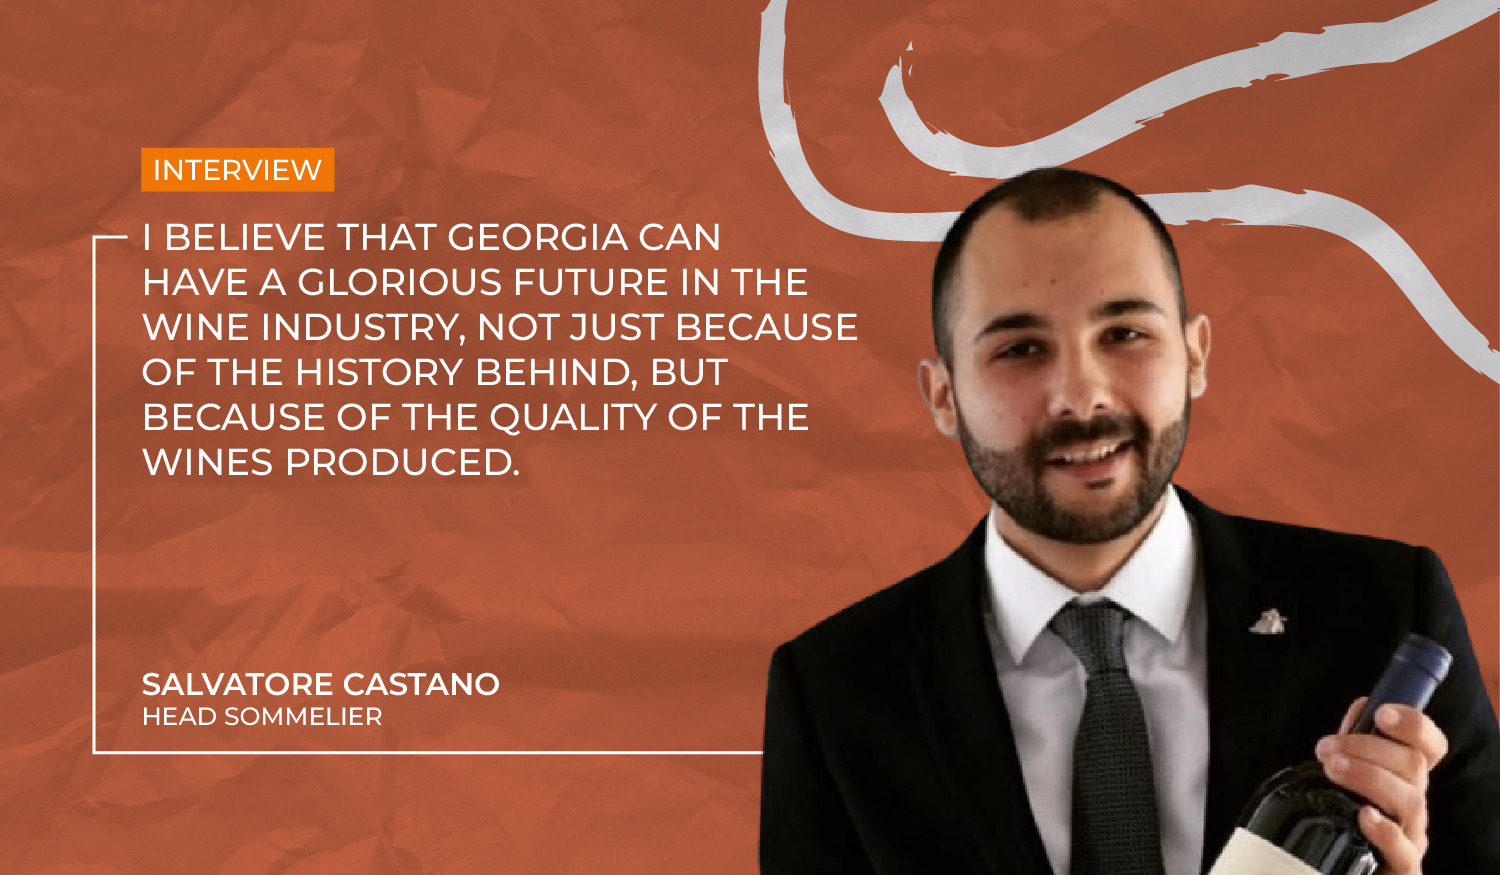 Salvatore Castano: I believe that Georgia can have a glorious future in the wine industry